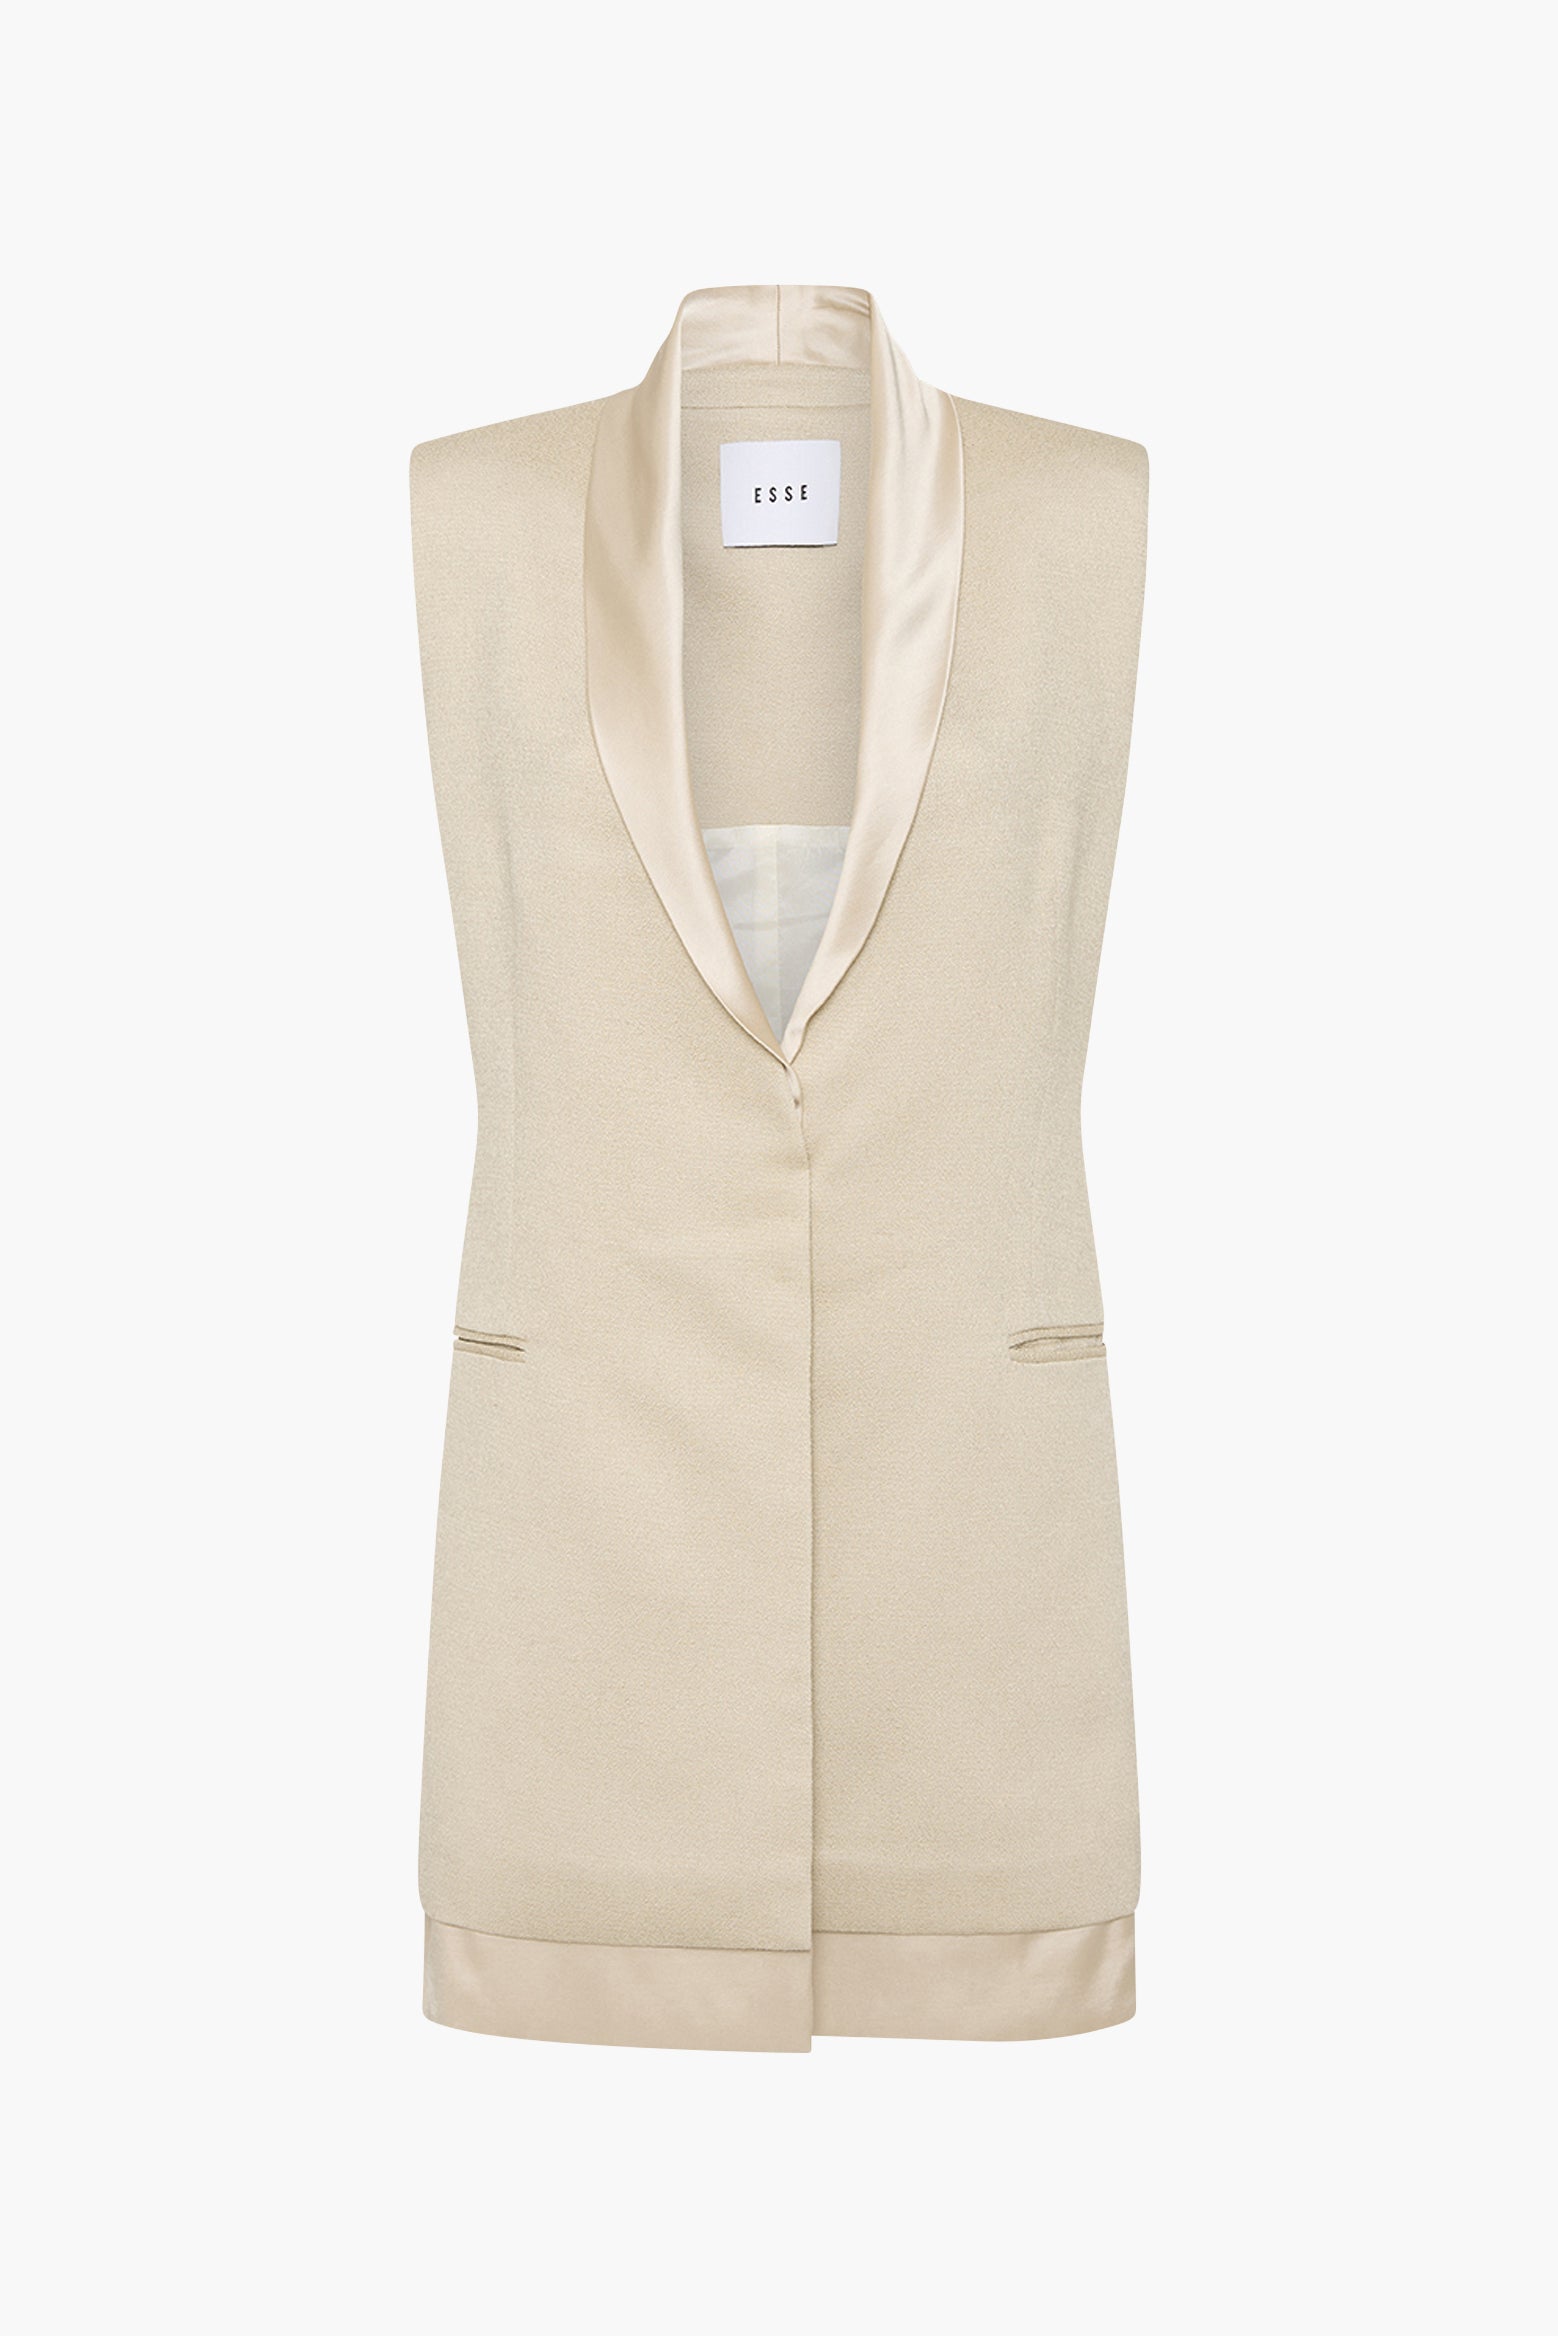 Esse Oude Vest in Oyster available at TNT The New Trend Australia.